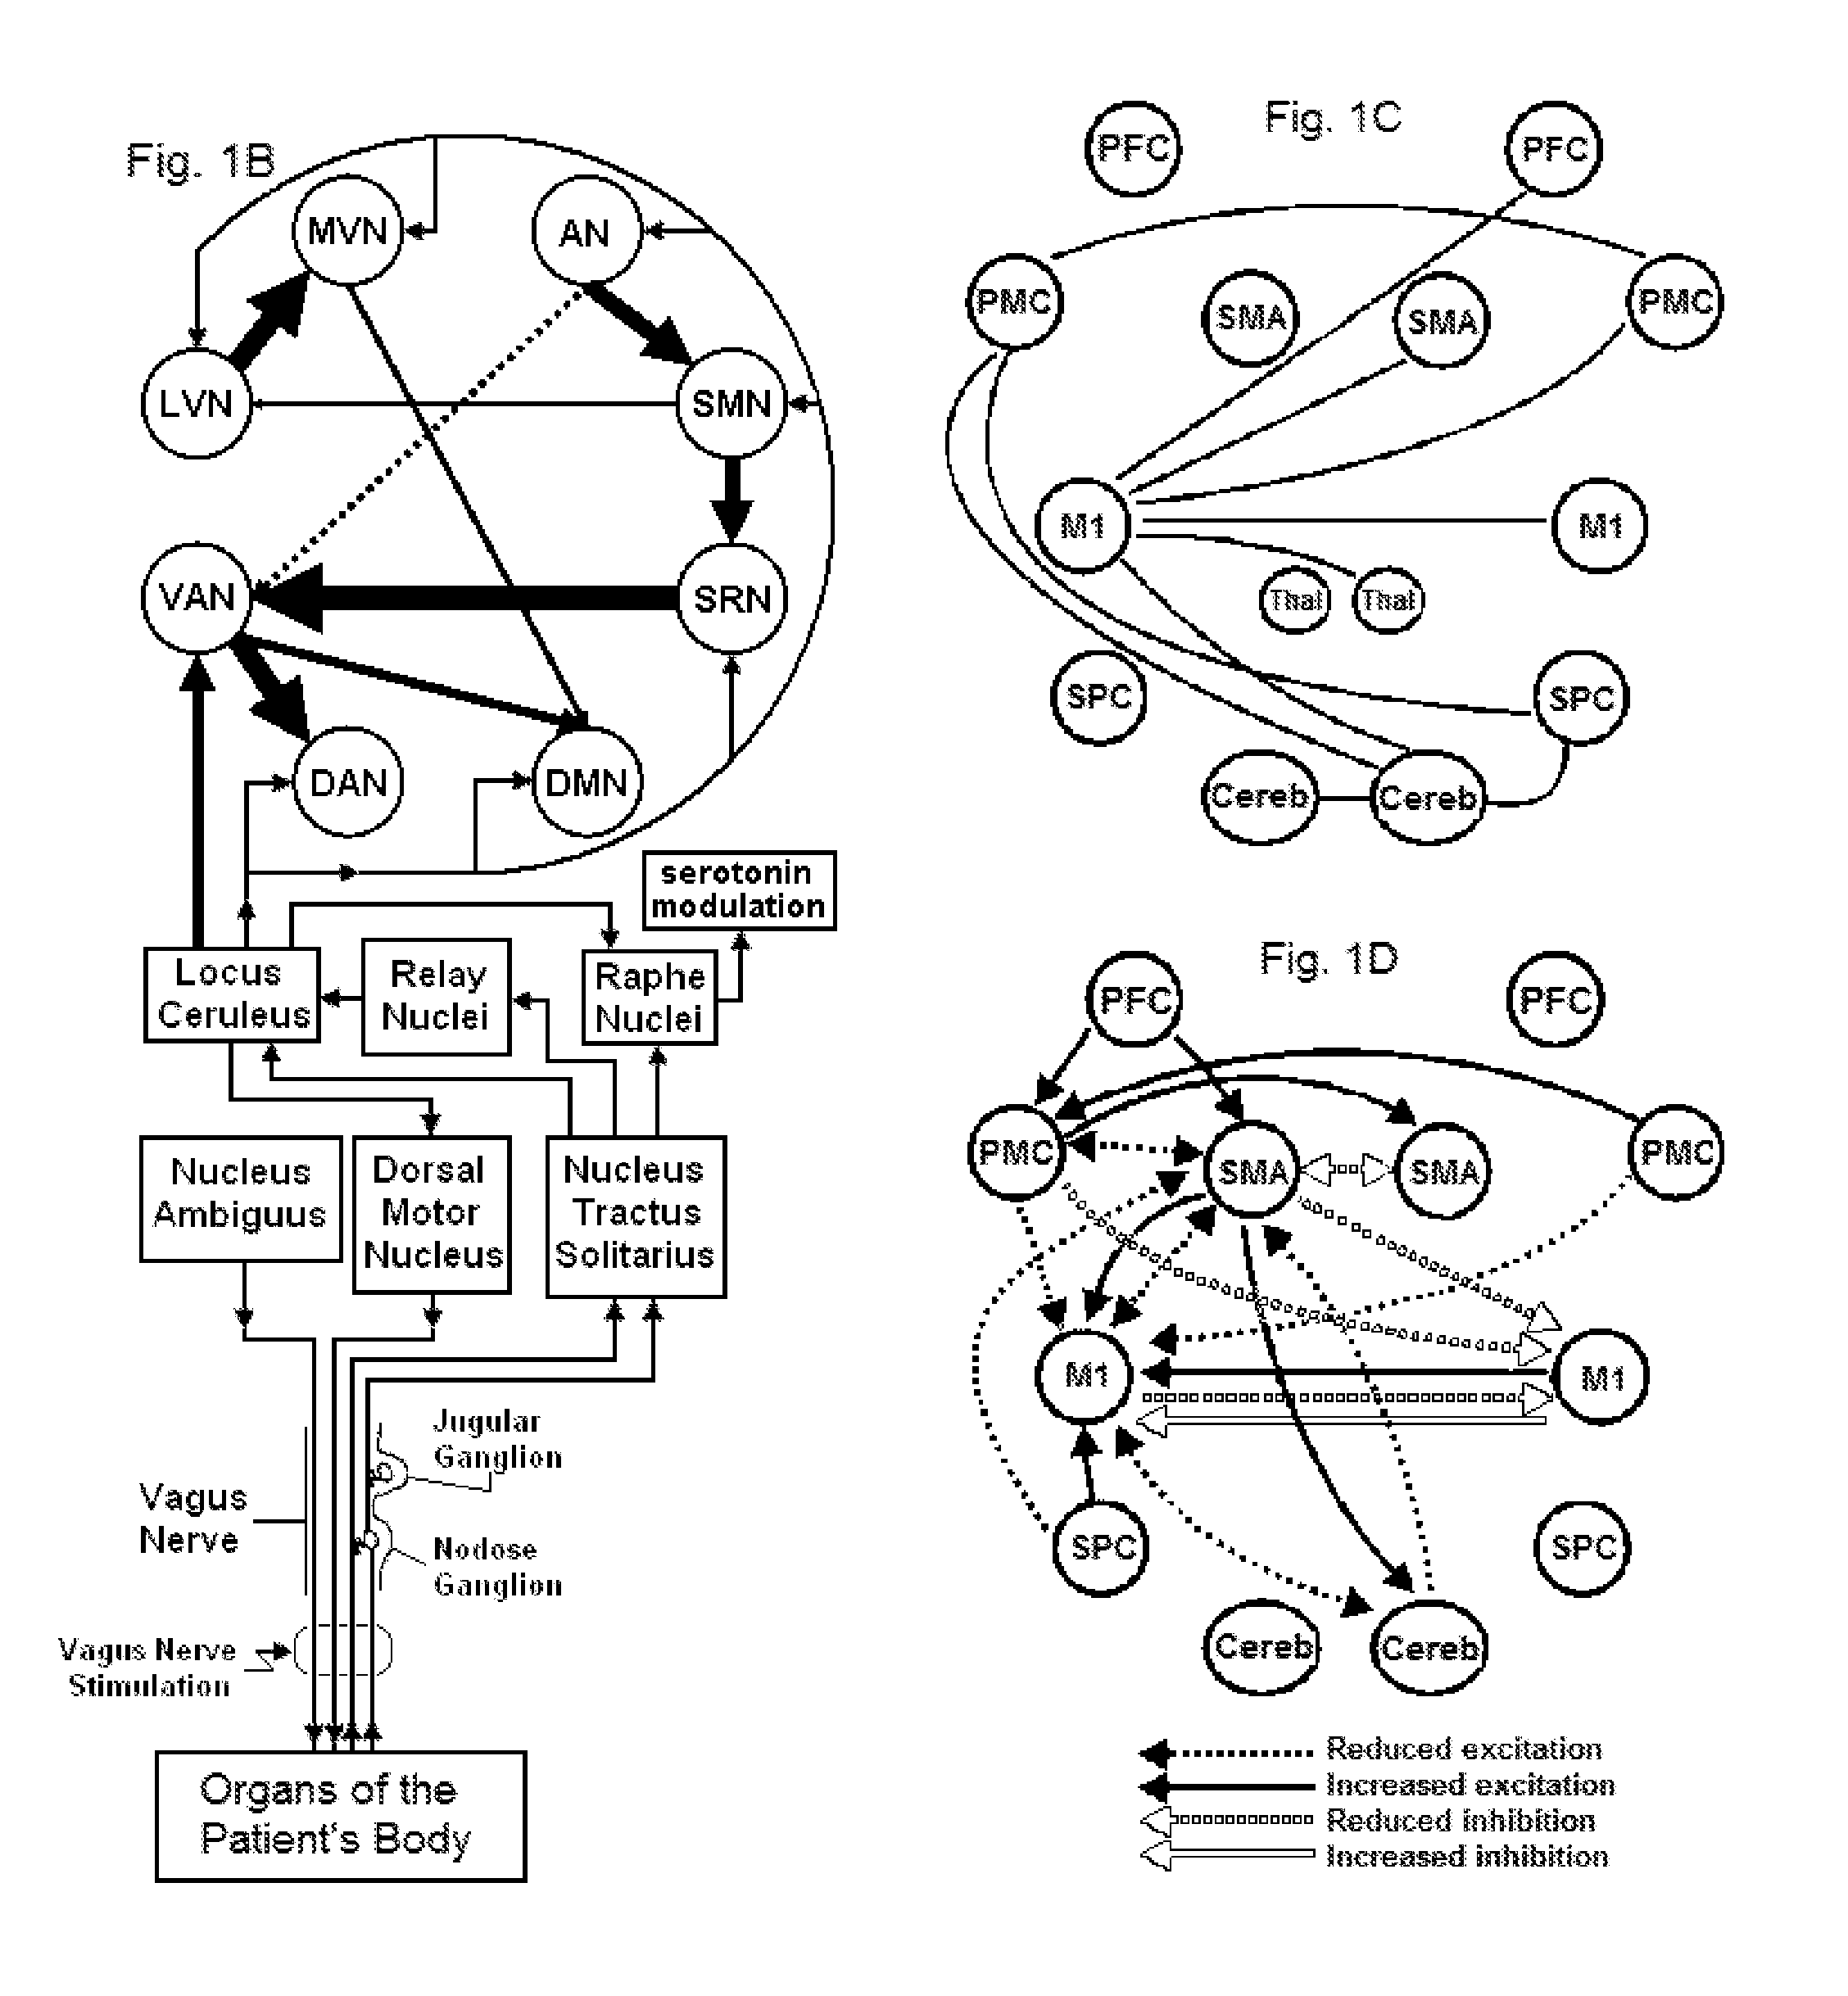 Systems and methods for vagal nerve stimulation